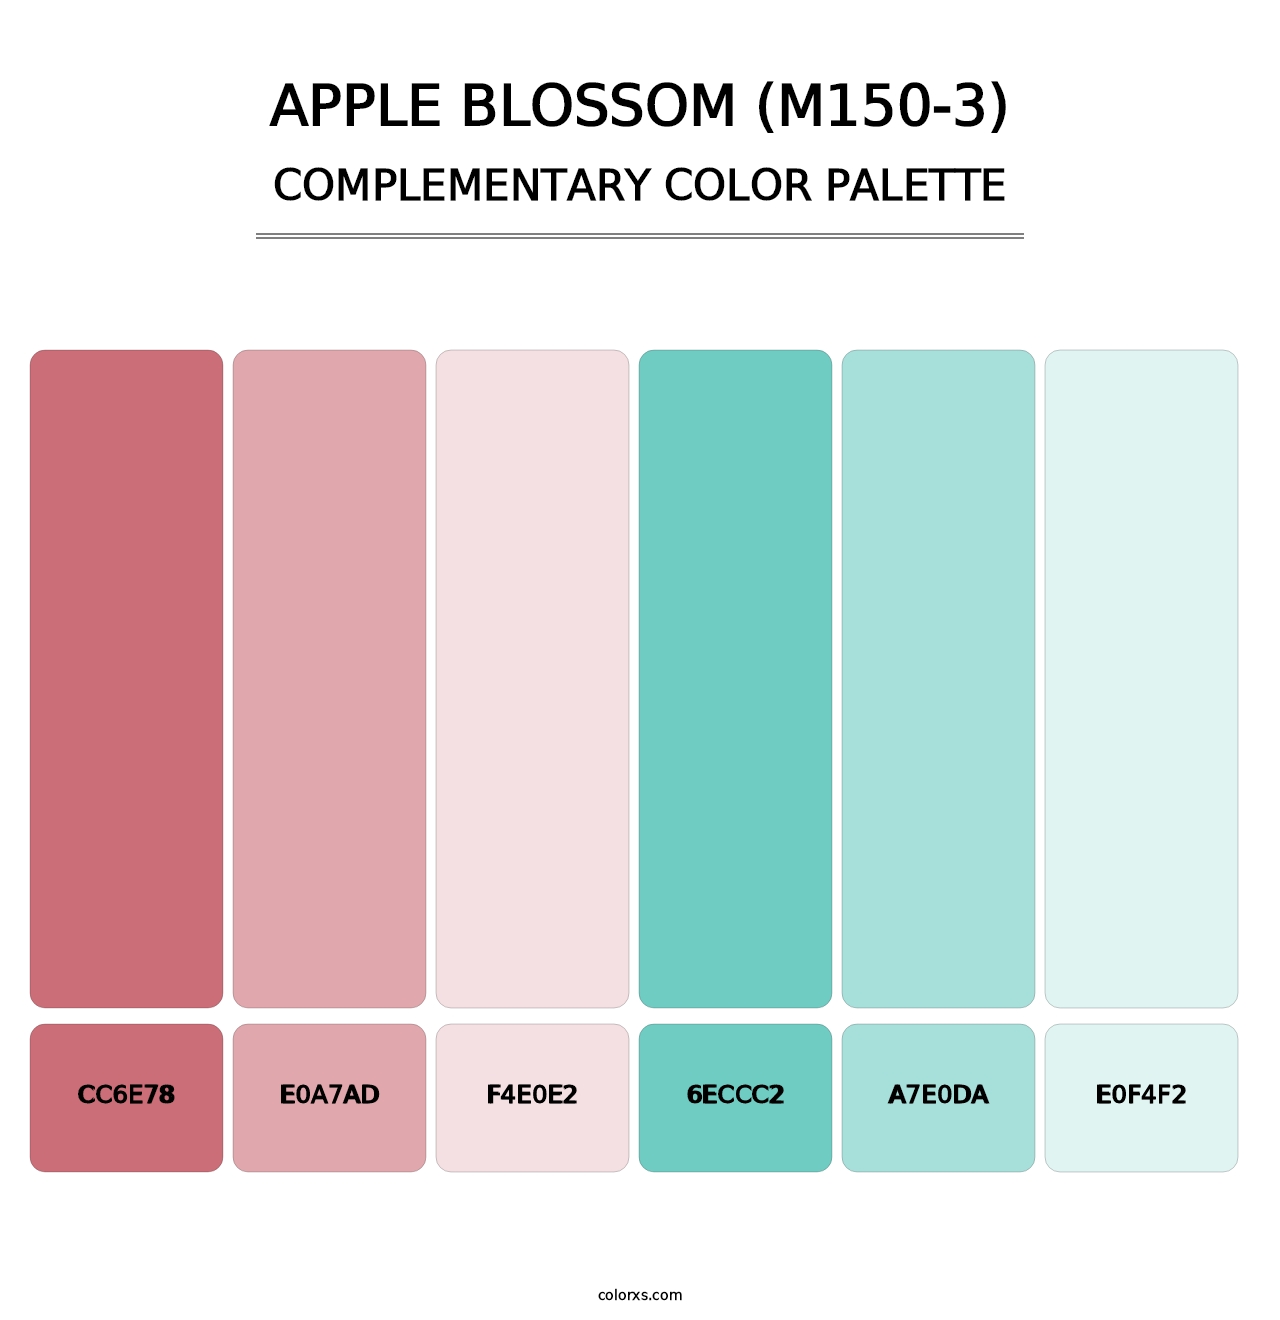 Apple Blossom (M150-3) - Complementary Color Palette